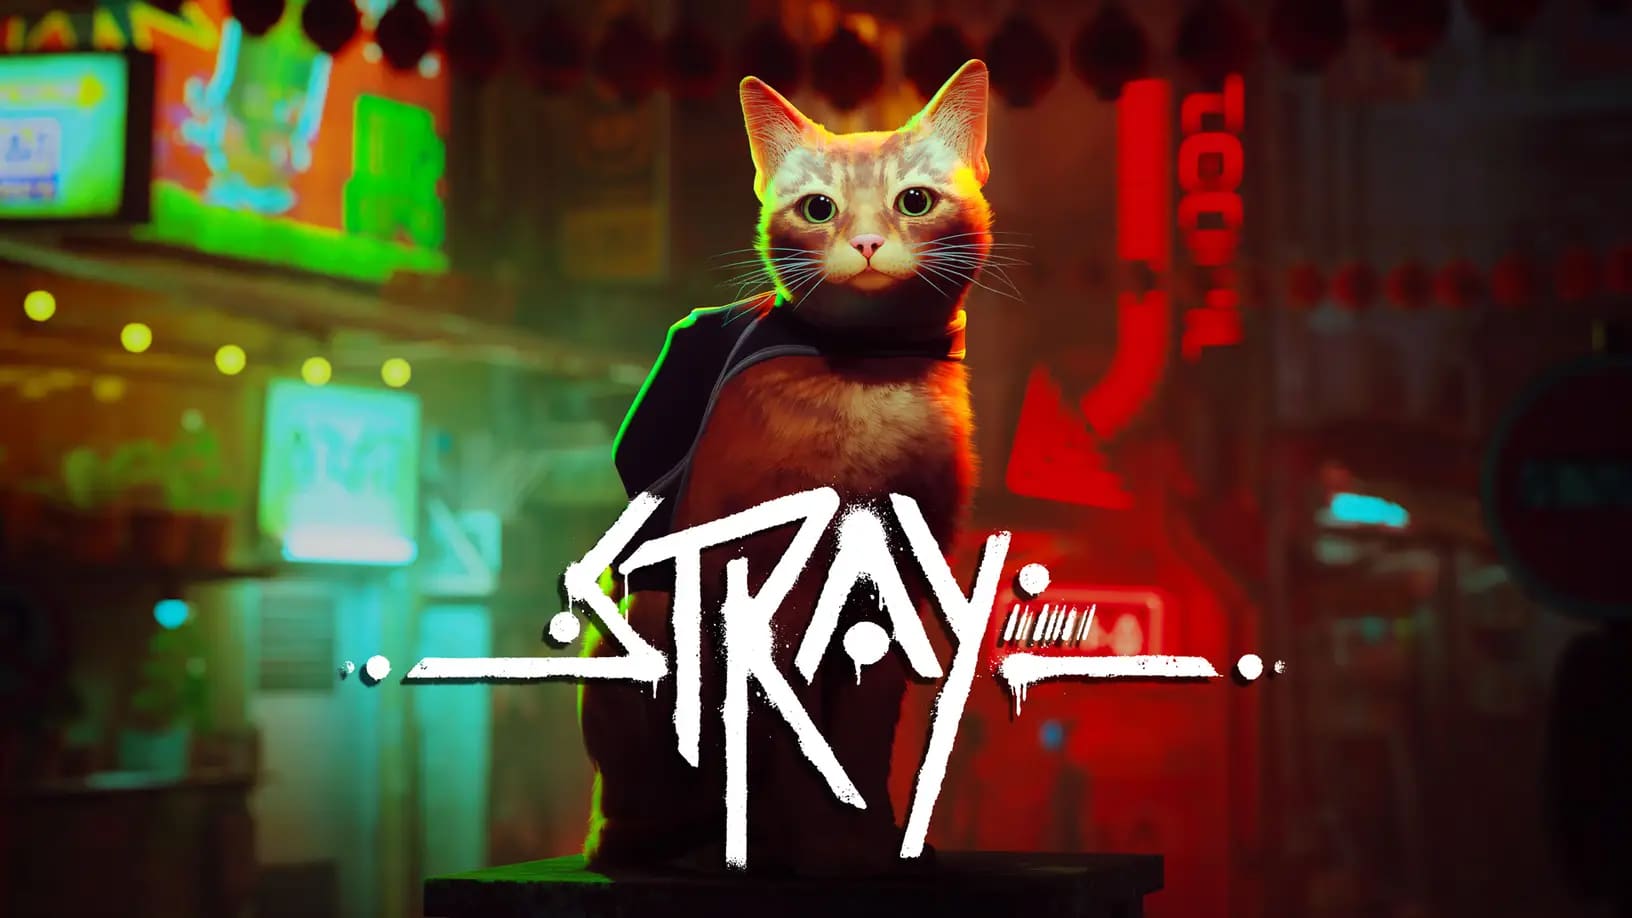 PS5 Event Reveals New Game Stray